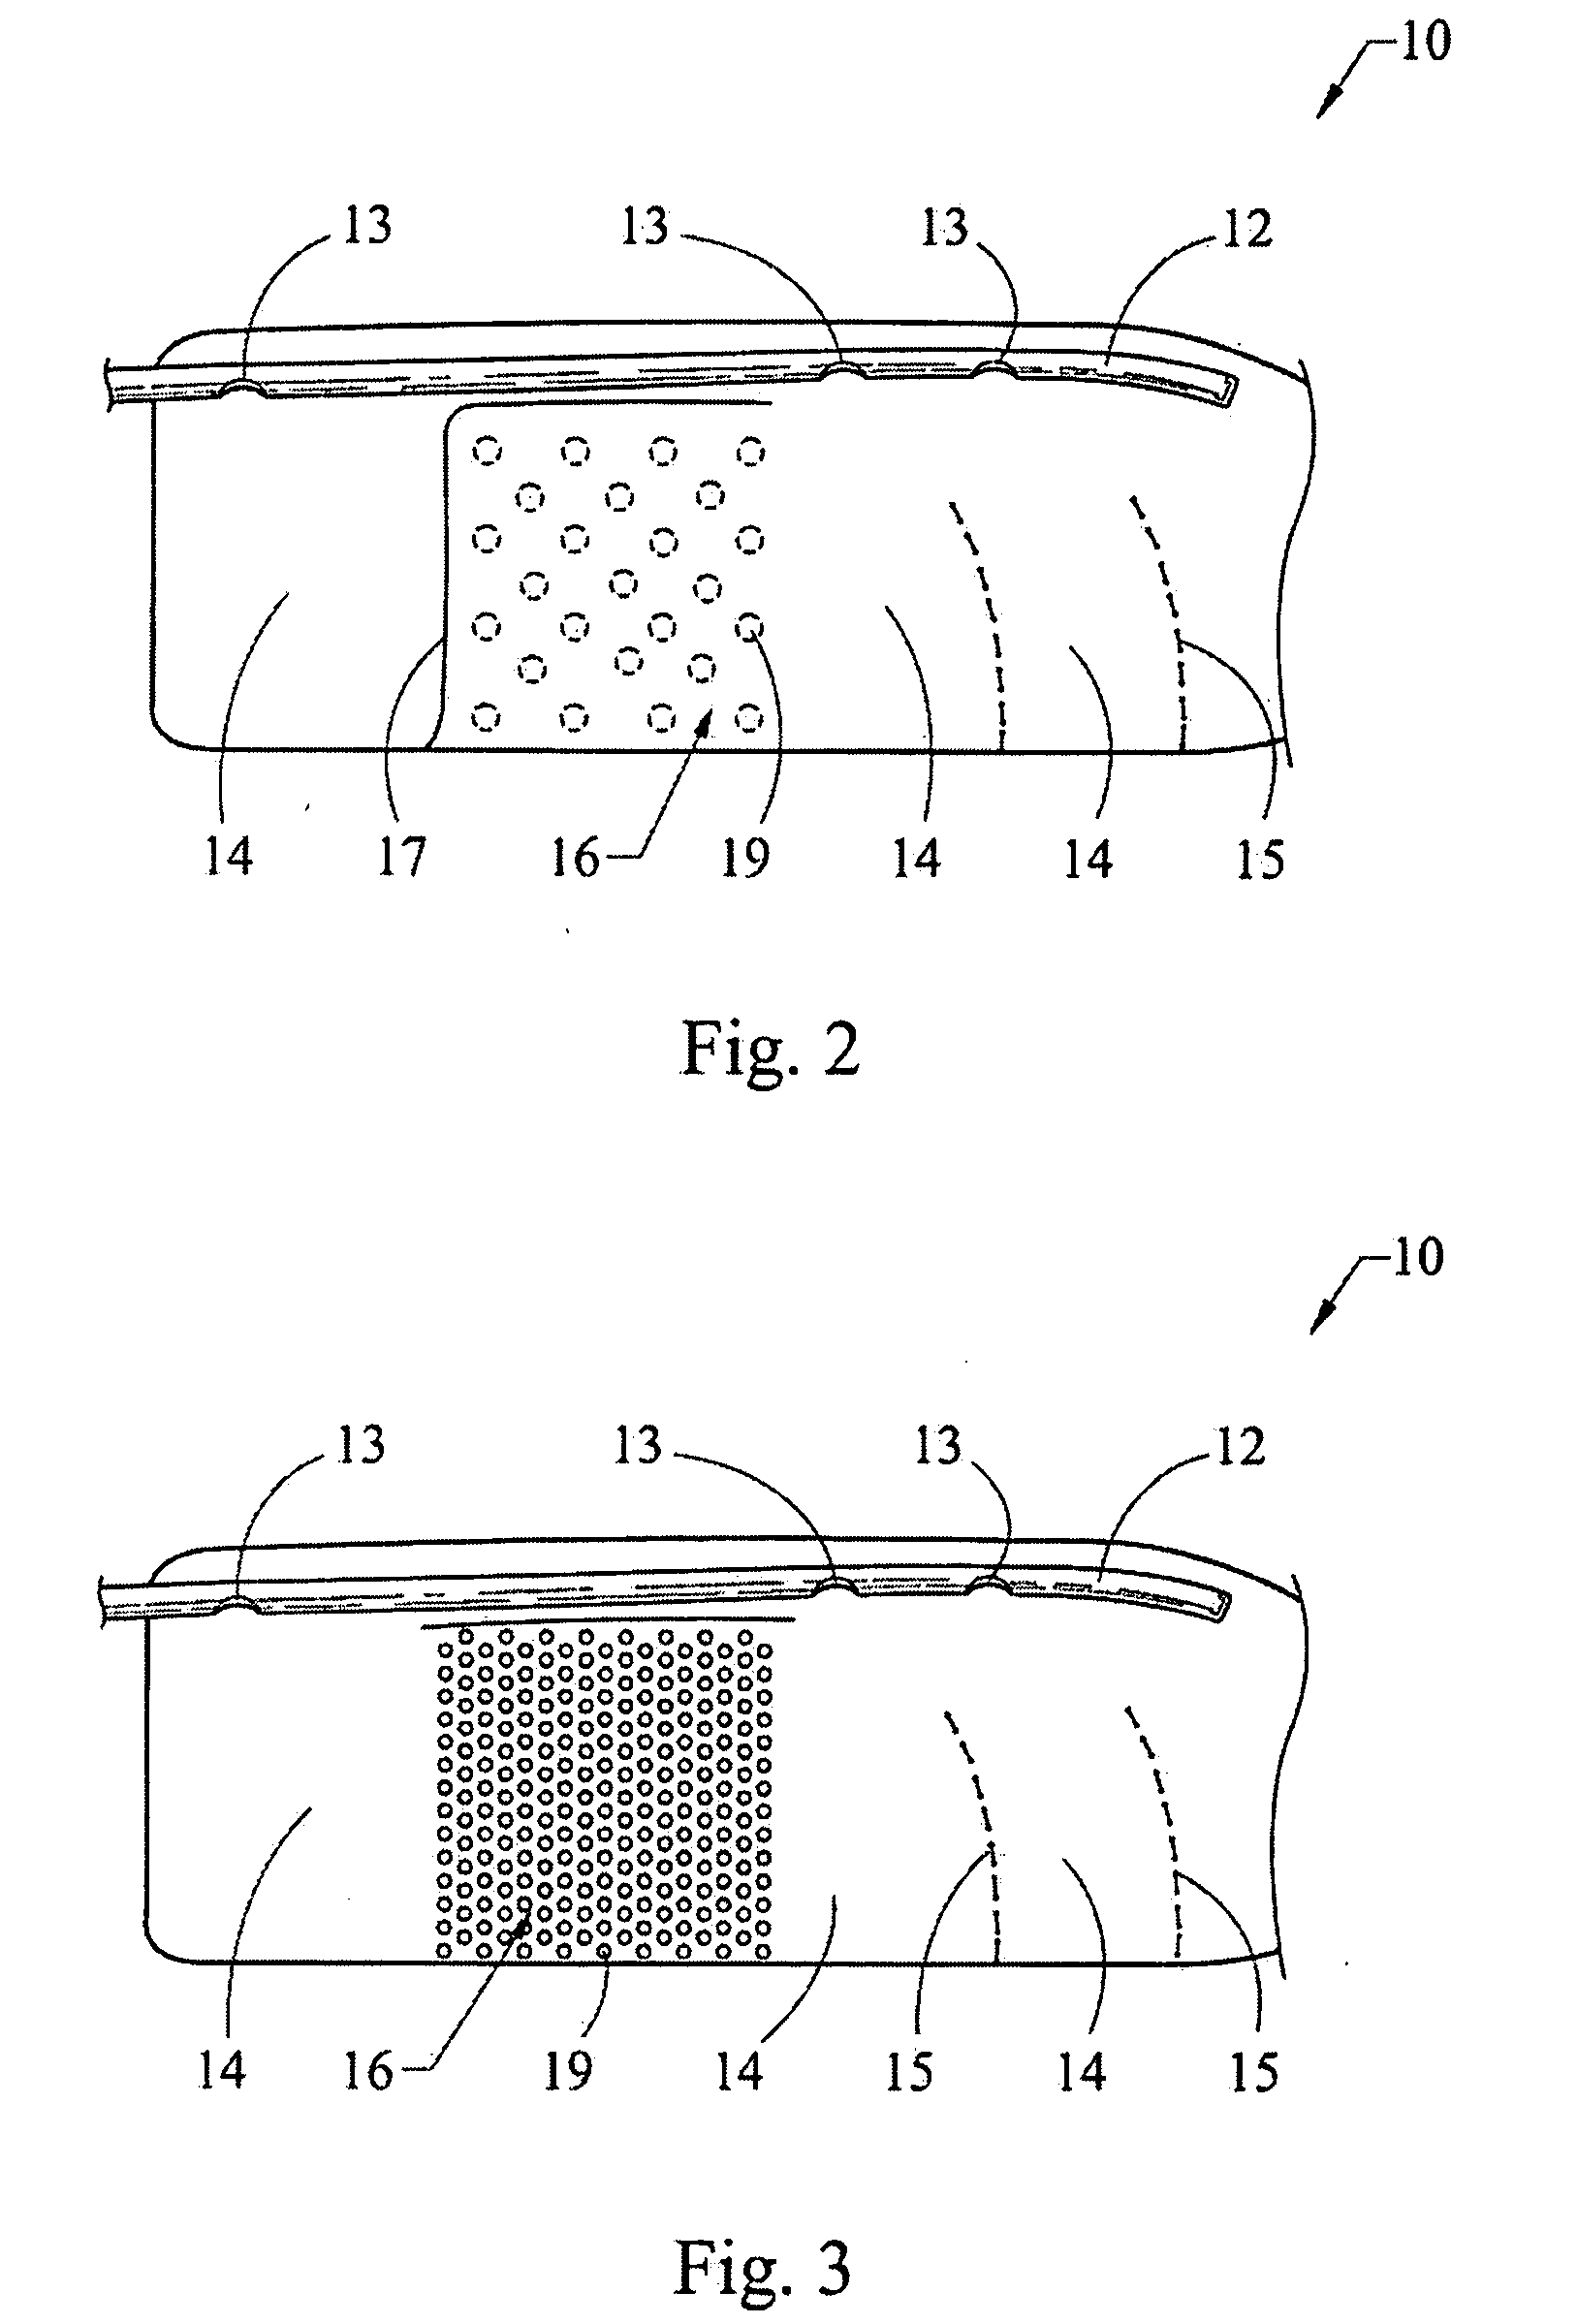 Side Air Bag With a Controlled Opening of a Pressure Equalization Chamber